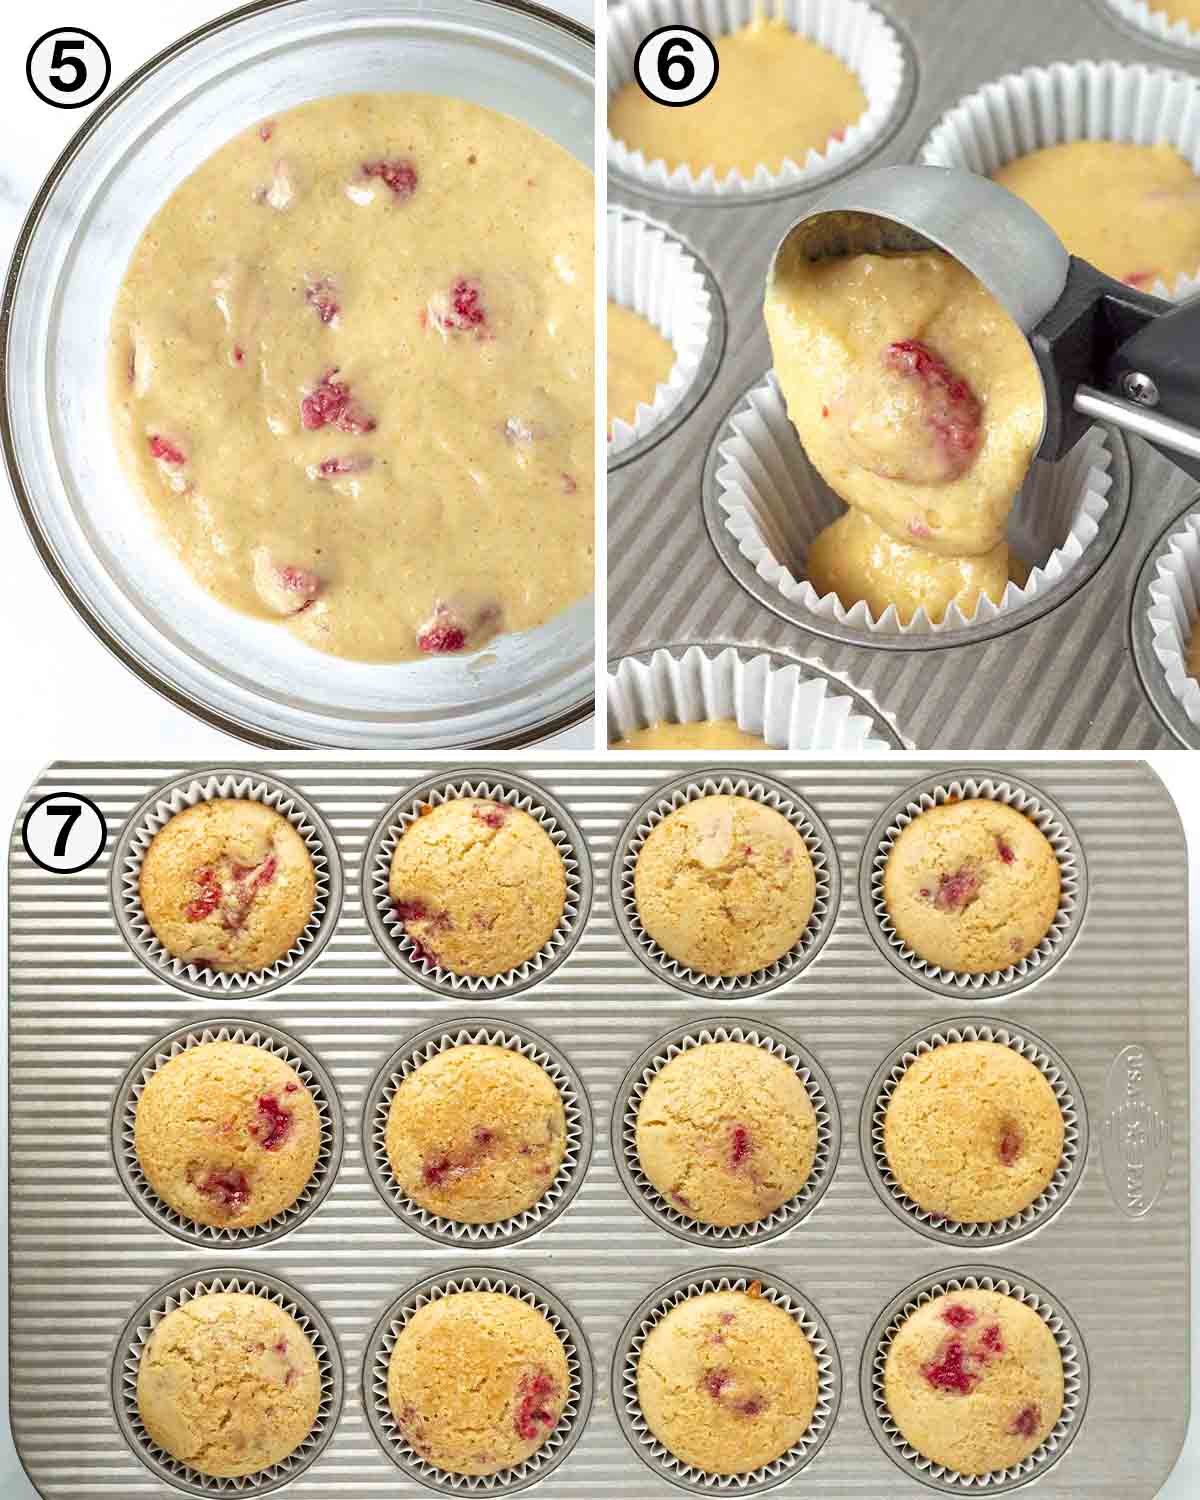 A collage of three images showing the final steps needed to make vegan gluten-free raspberry muffins.